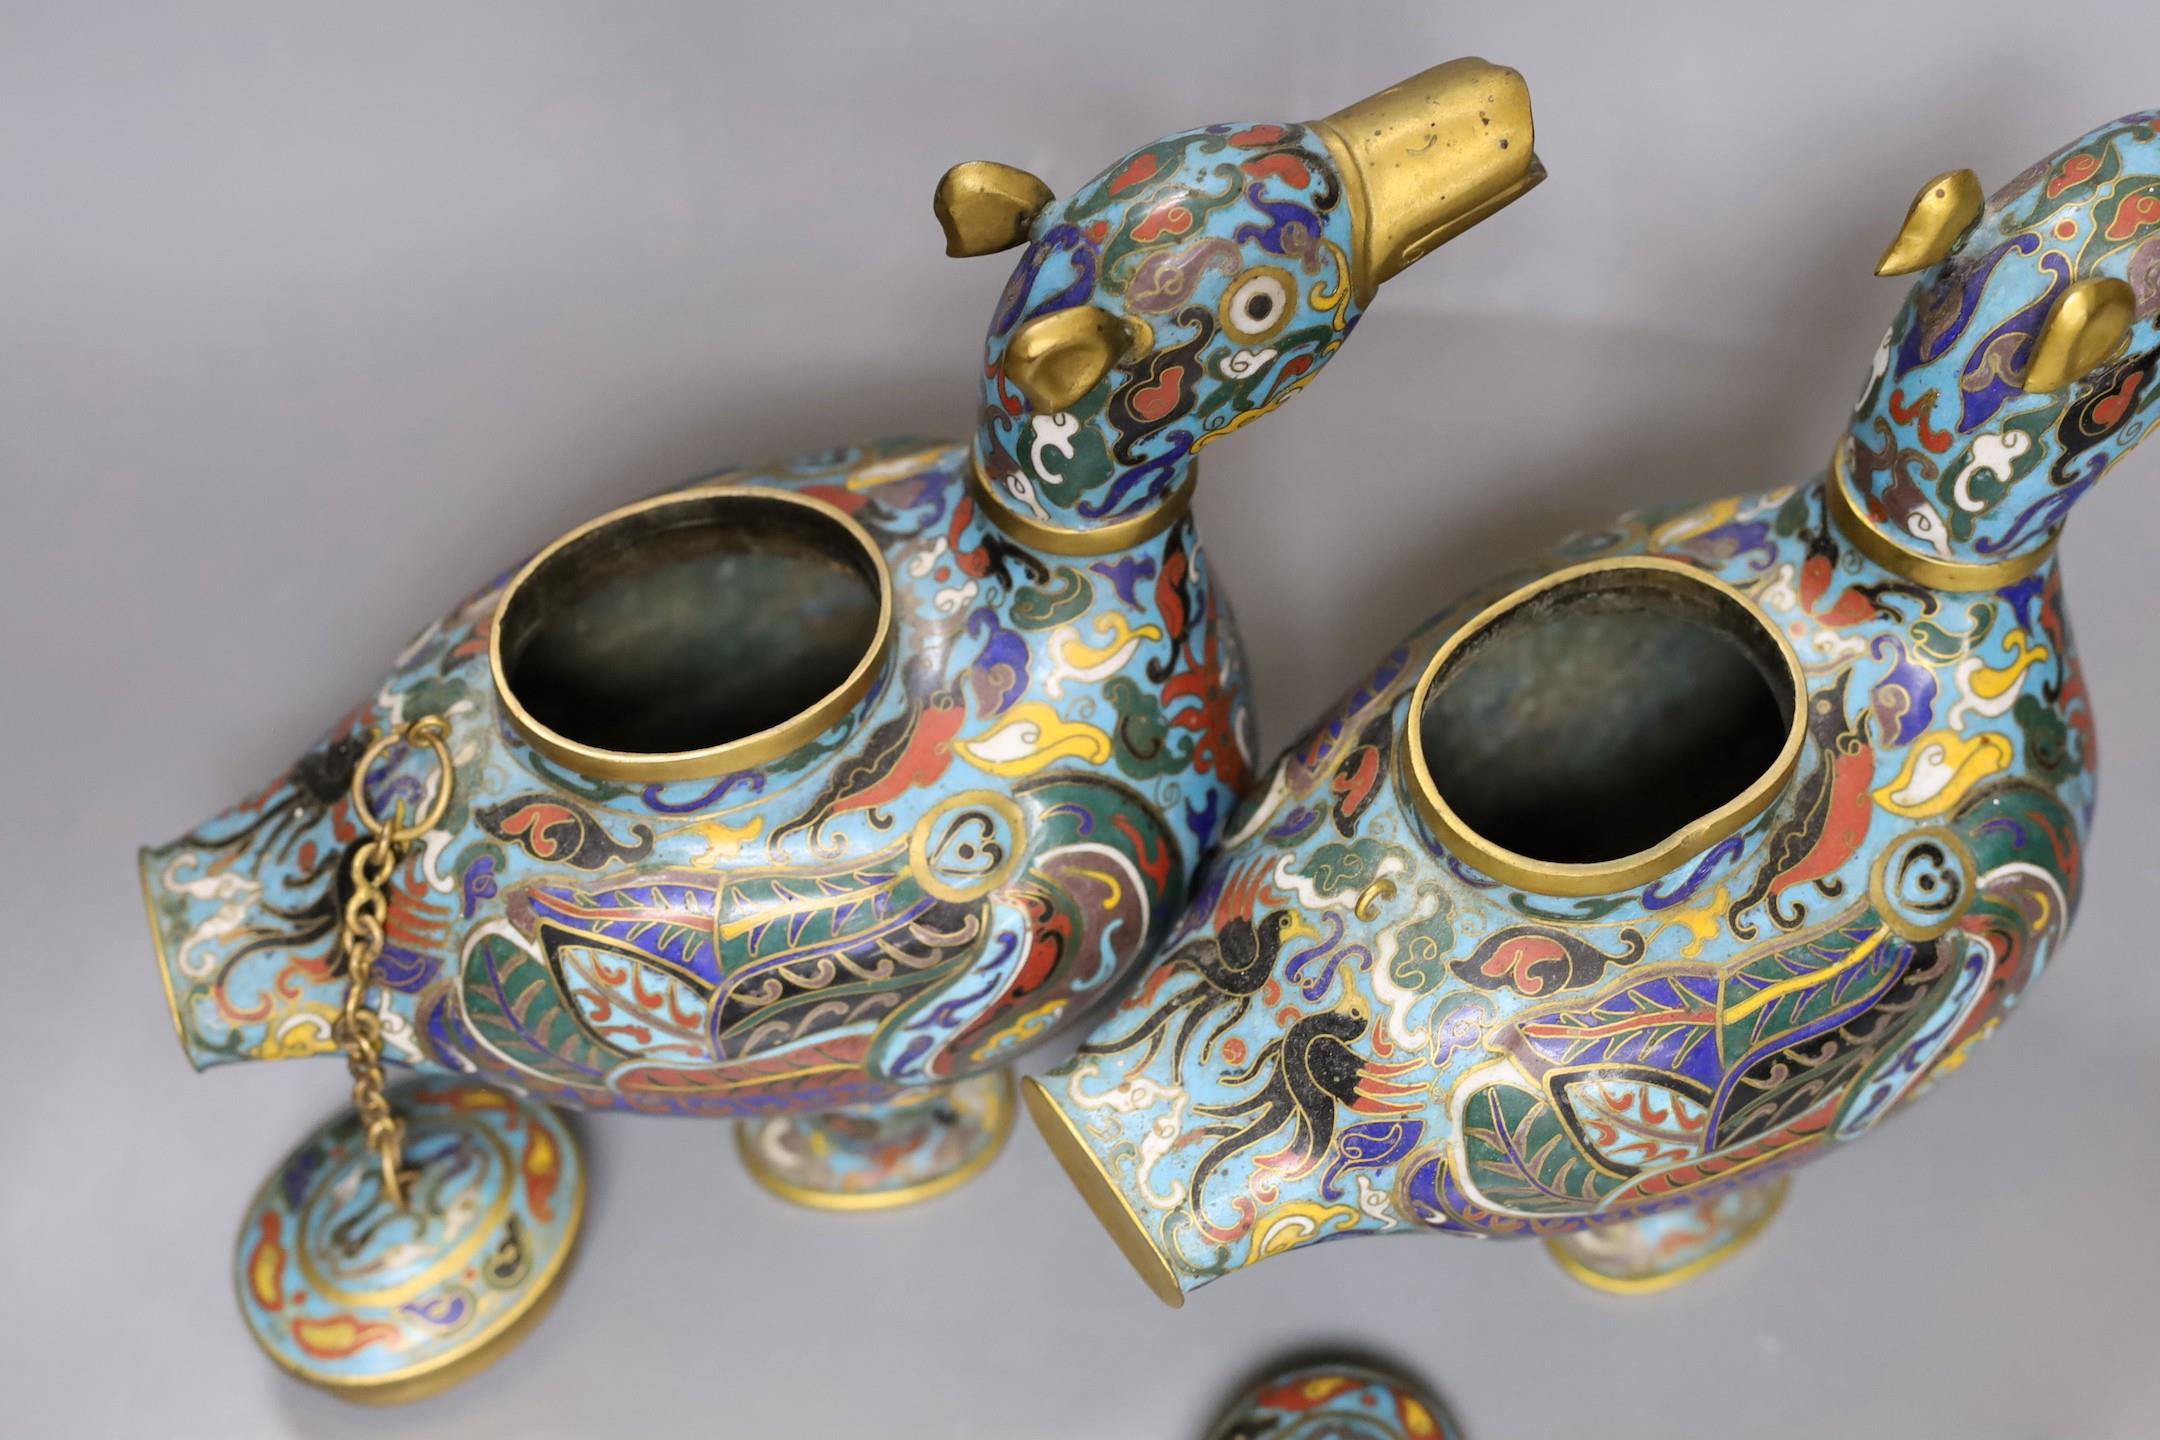 A pair of 20th century Chinese cloisonné enamel ‘duck’ vessels, 20cm - Image 3 of 3